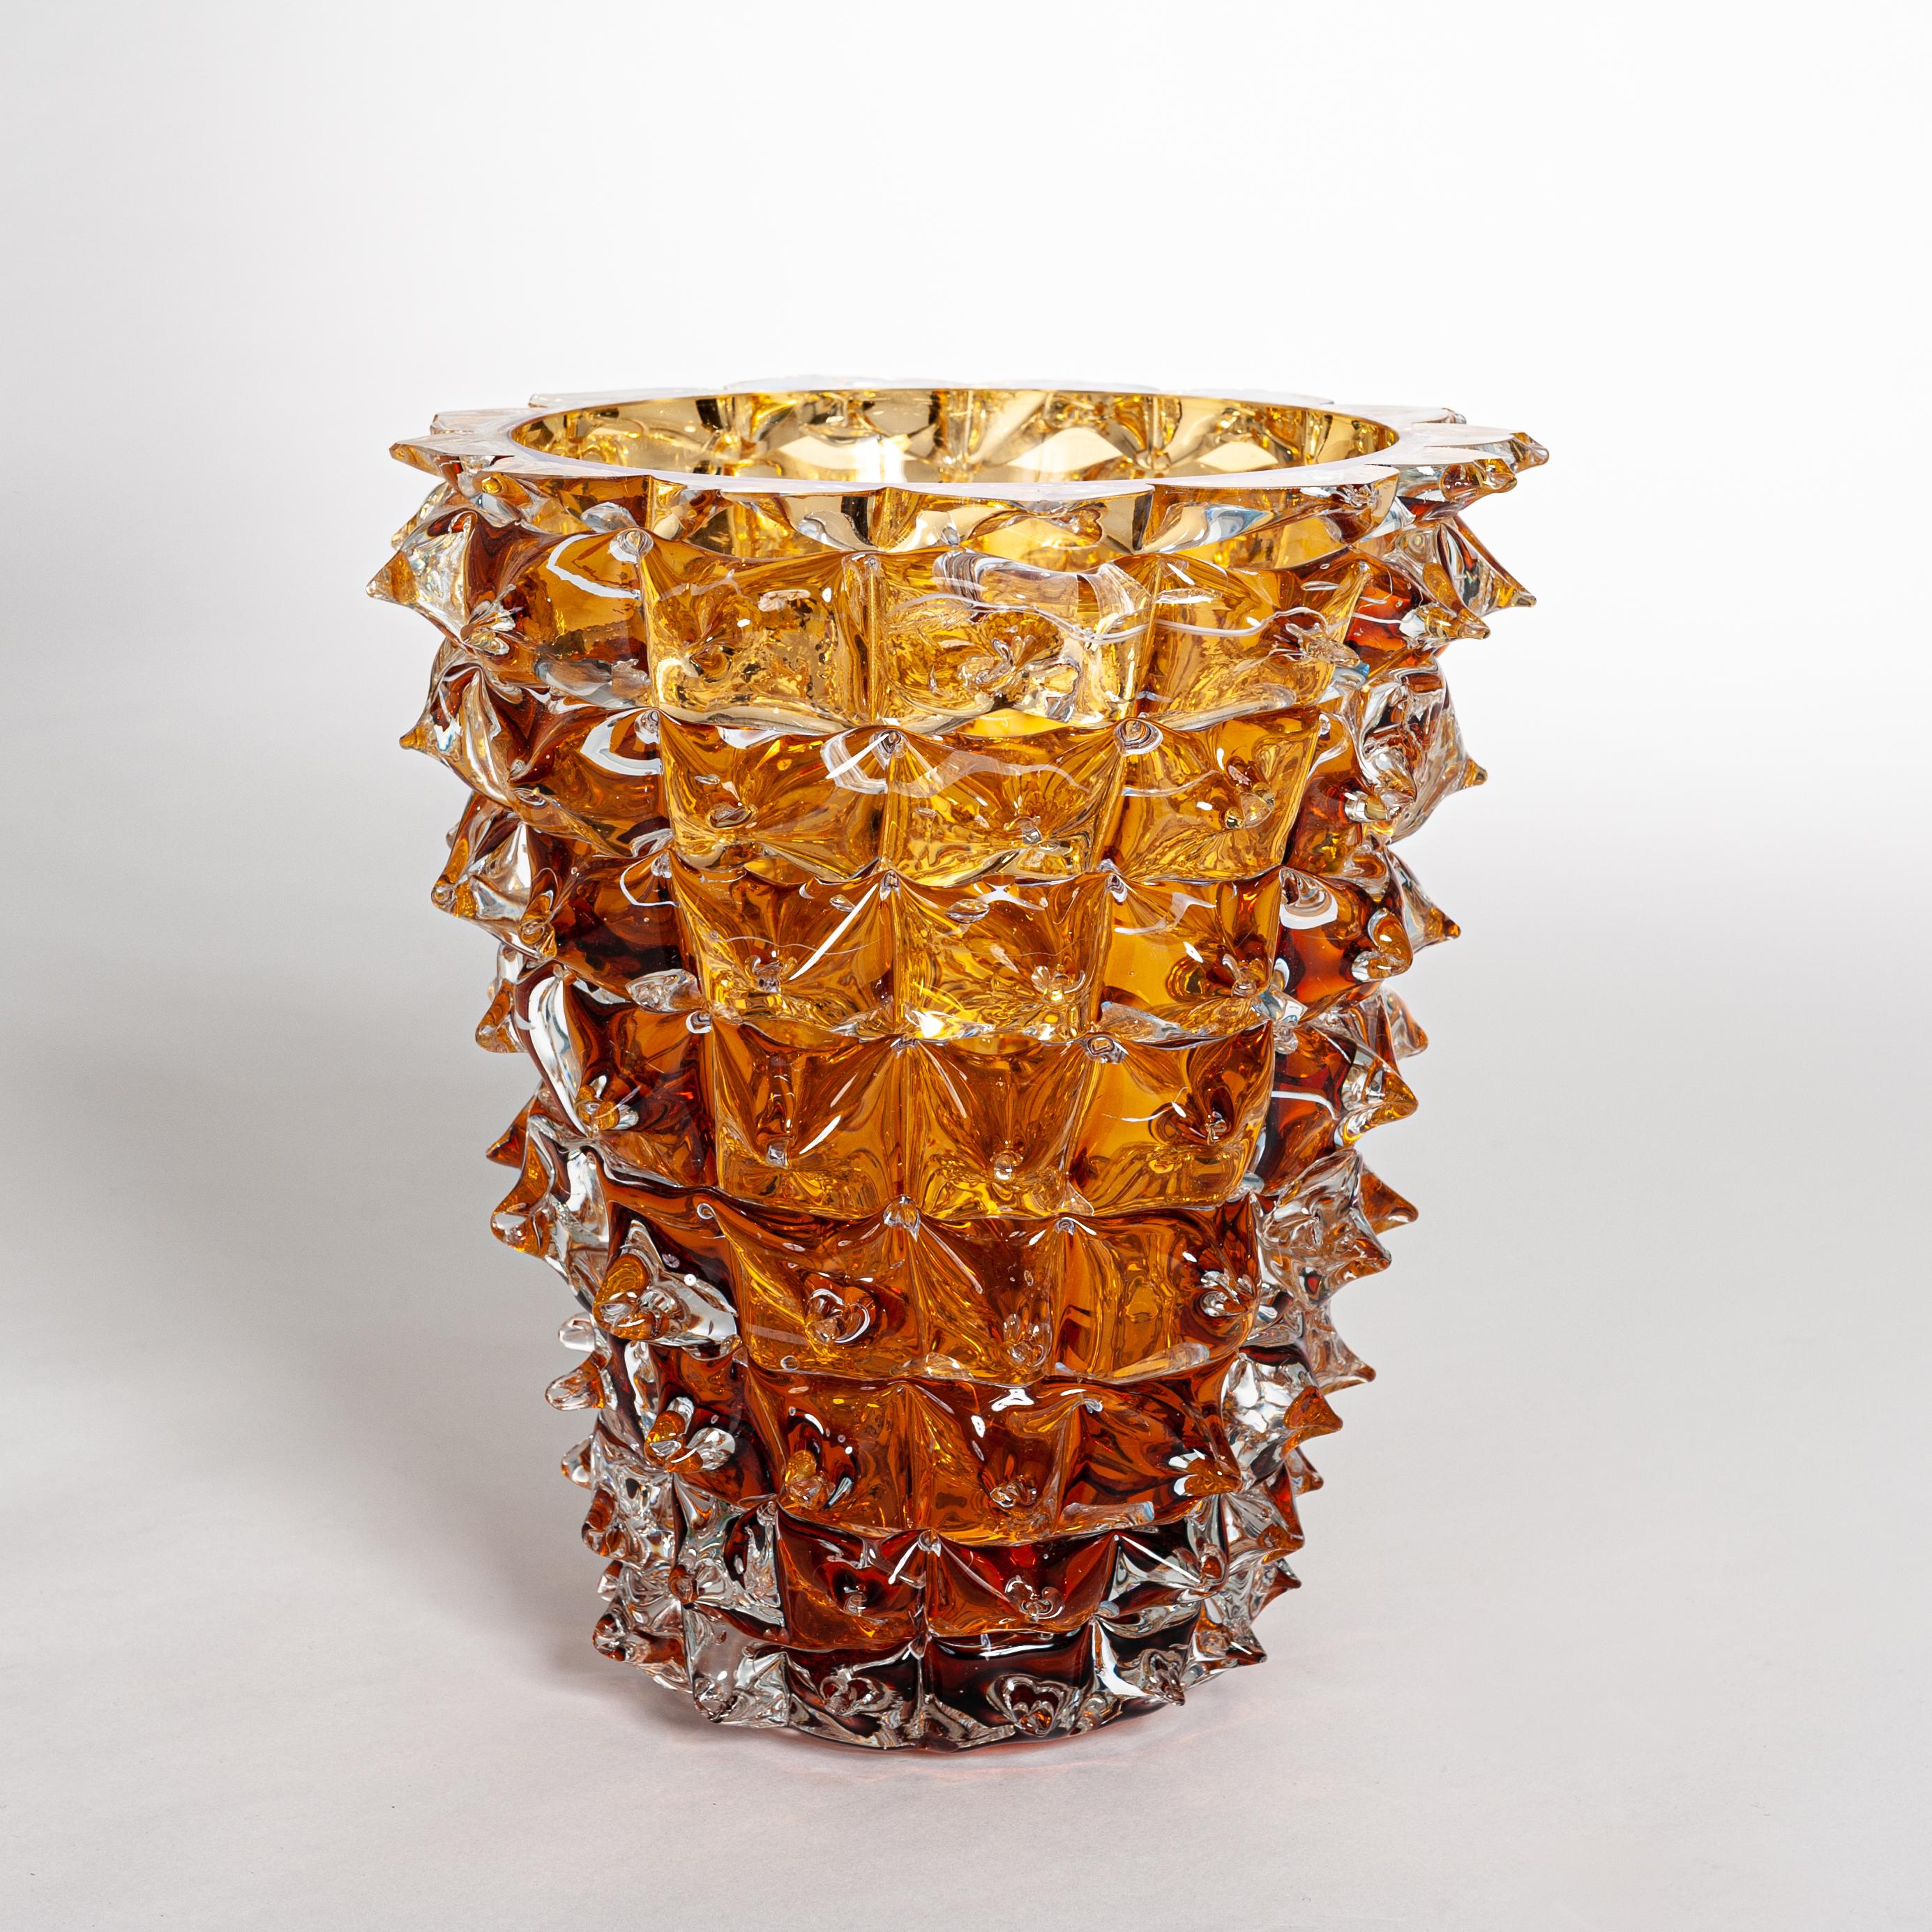 Pair of Amber Colored Vases in Murano Glass with Spikes Decor, Signed Costantini 1